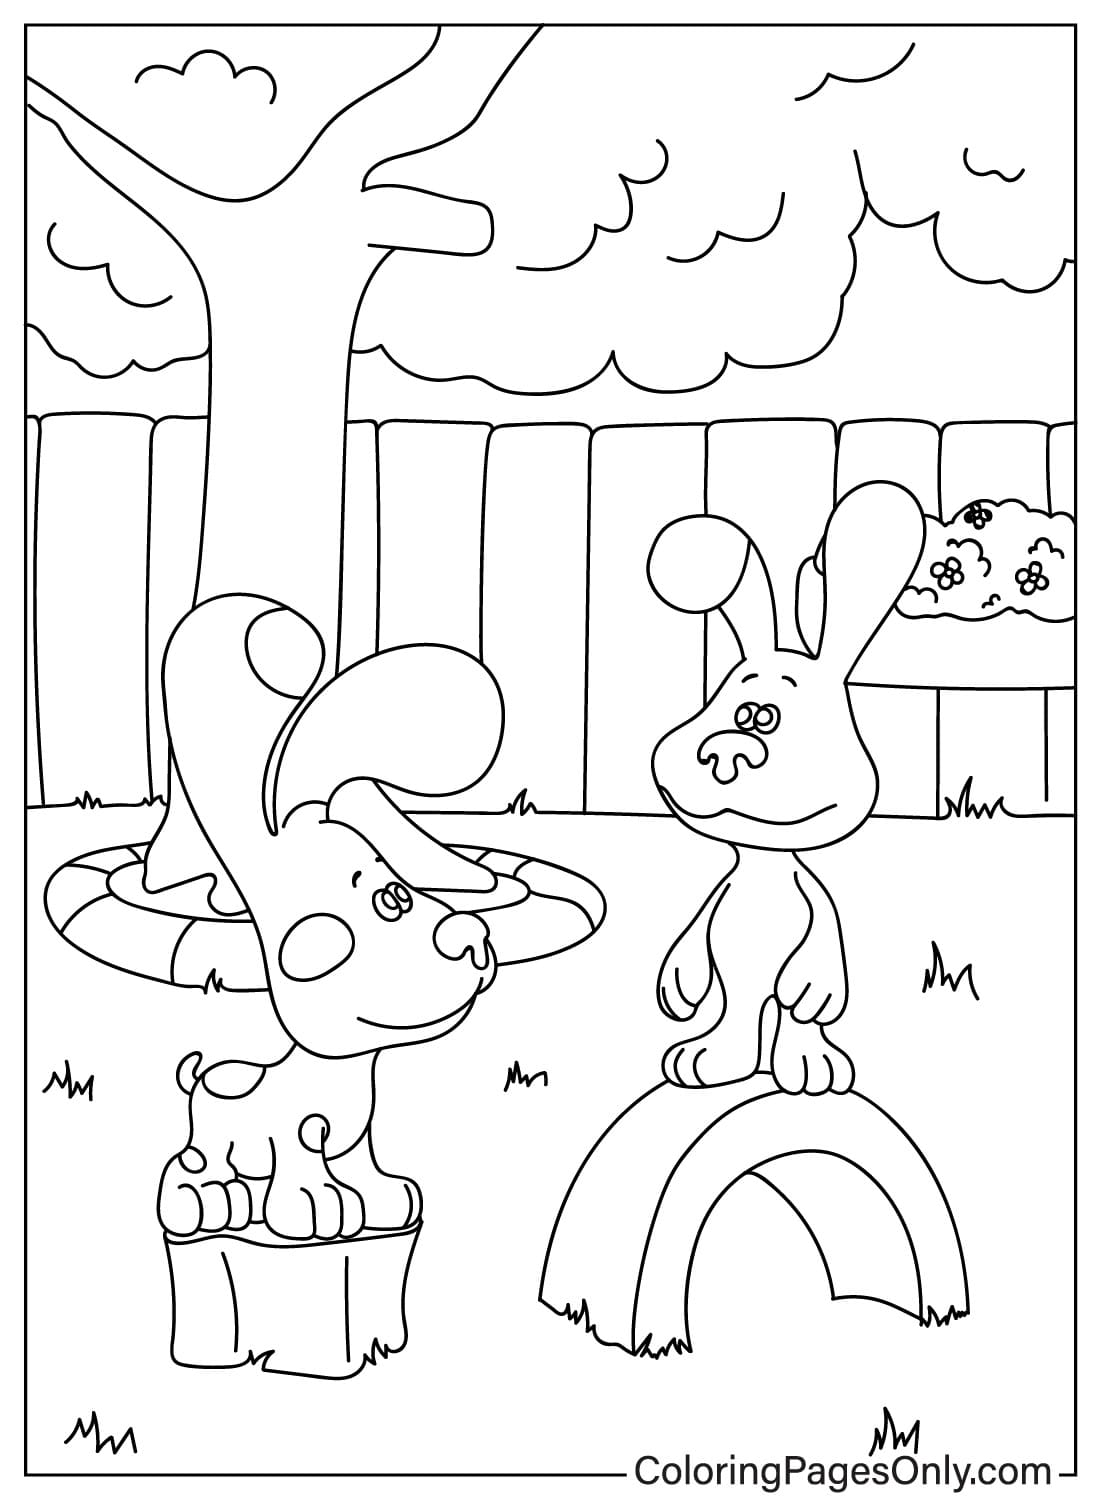 Blue’s Clues Coloring Page JPG